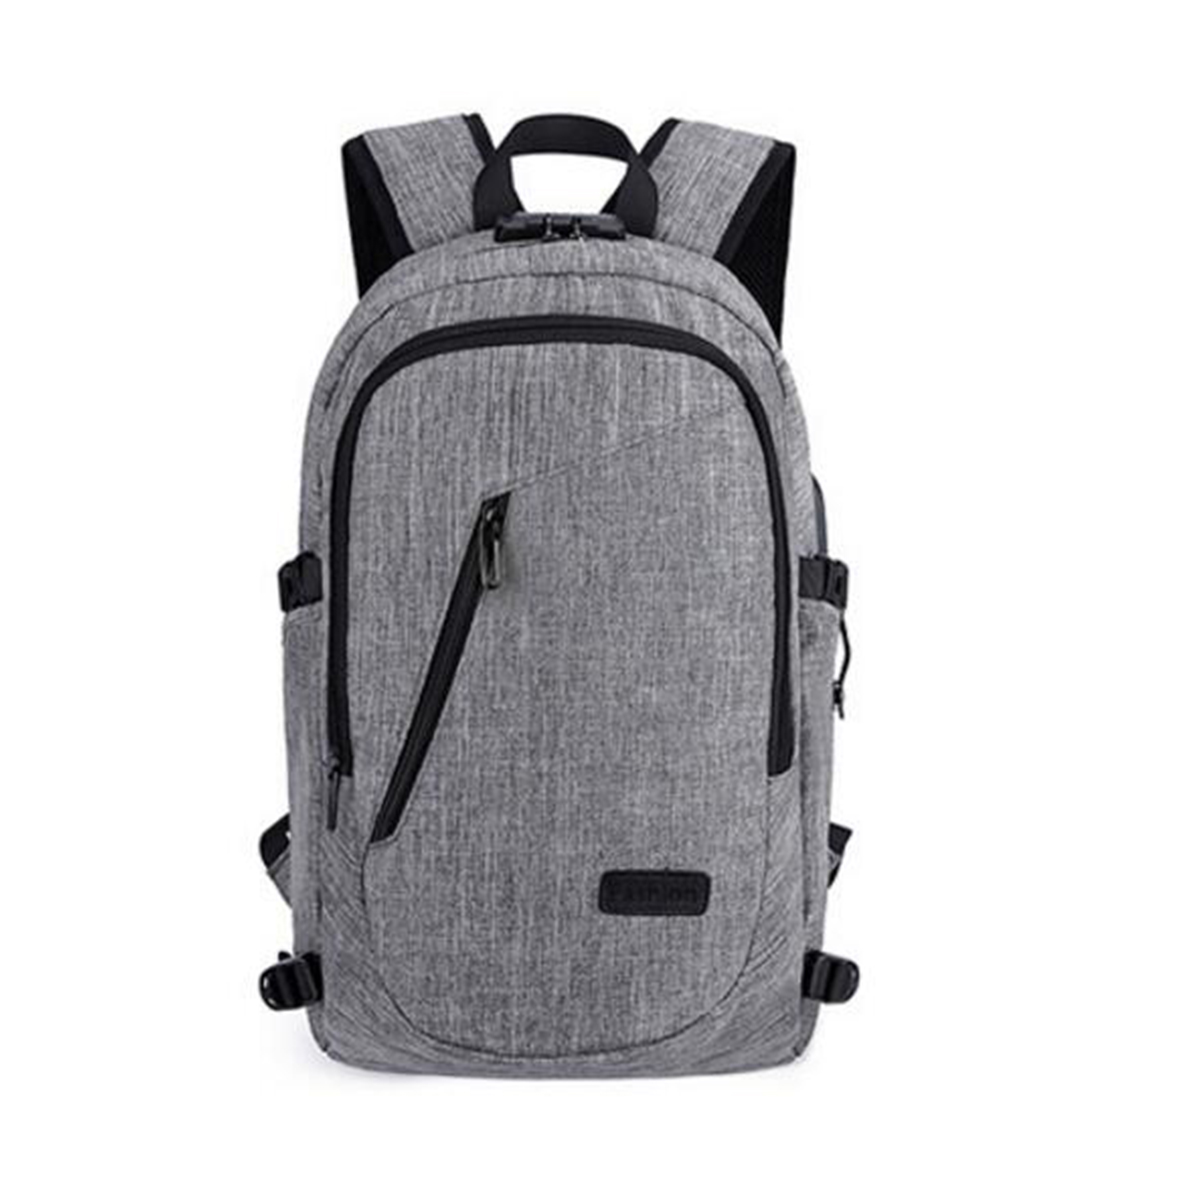 Scratch Proof USB backpack with Laptop Compartment